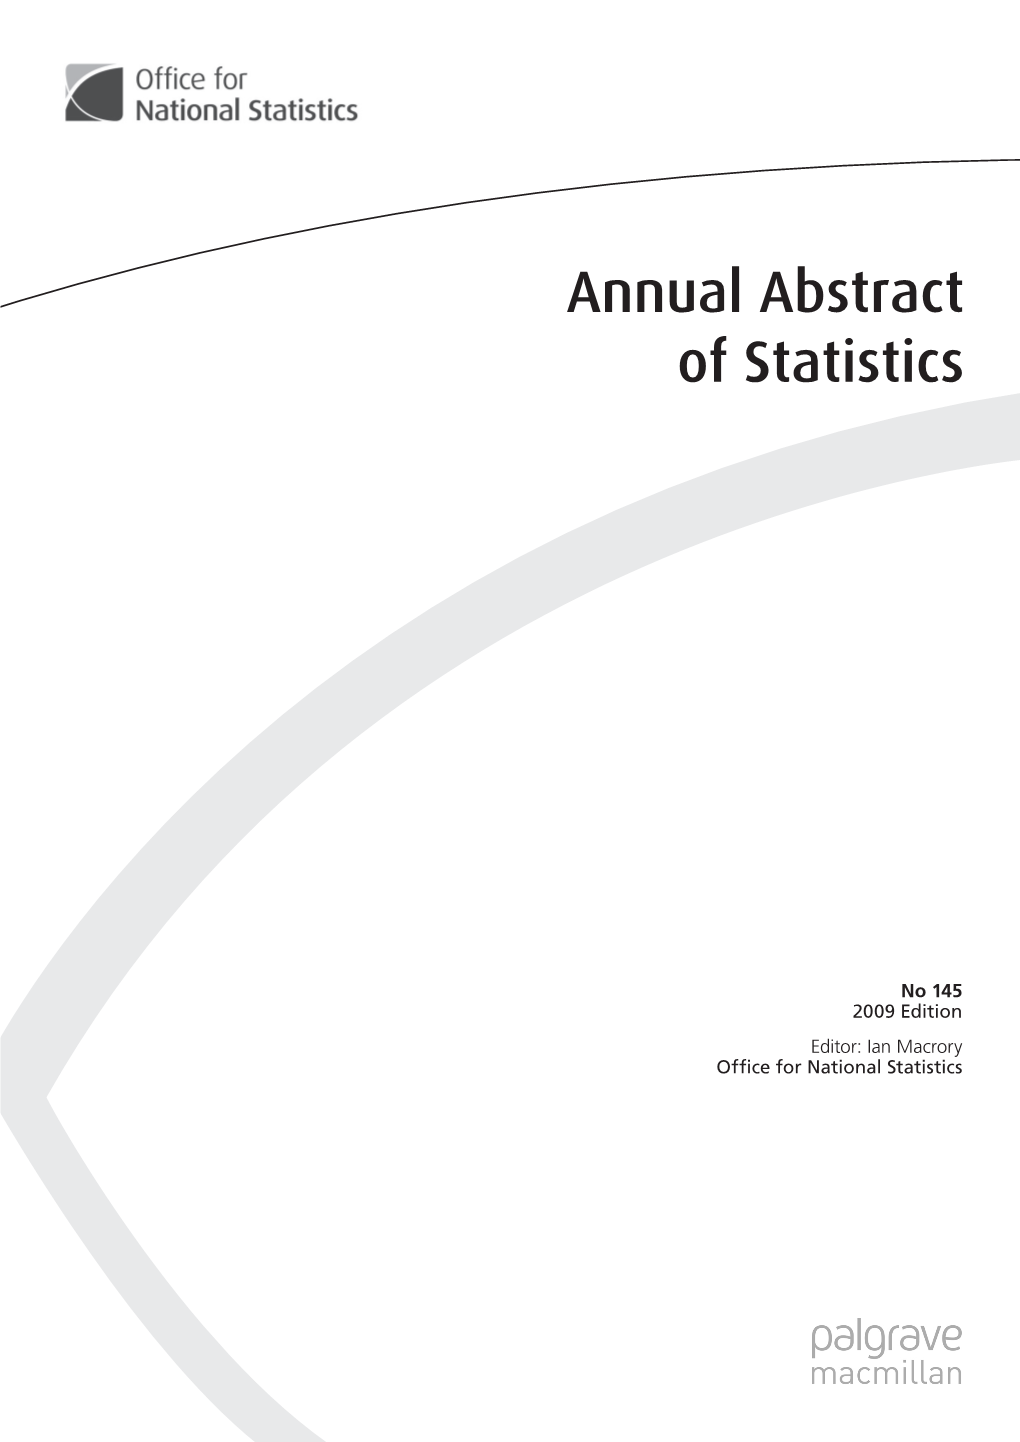 Annual Abstract of Statistics 2009